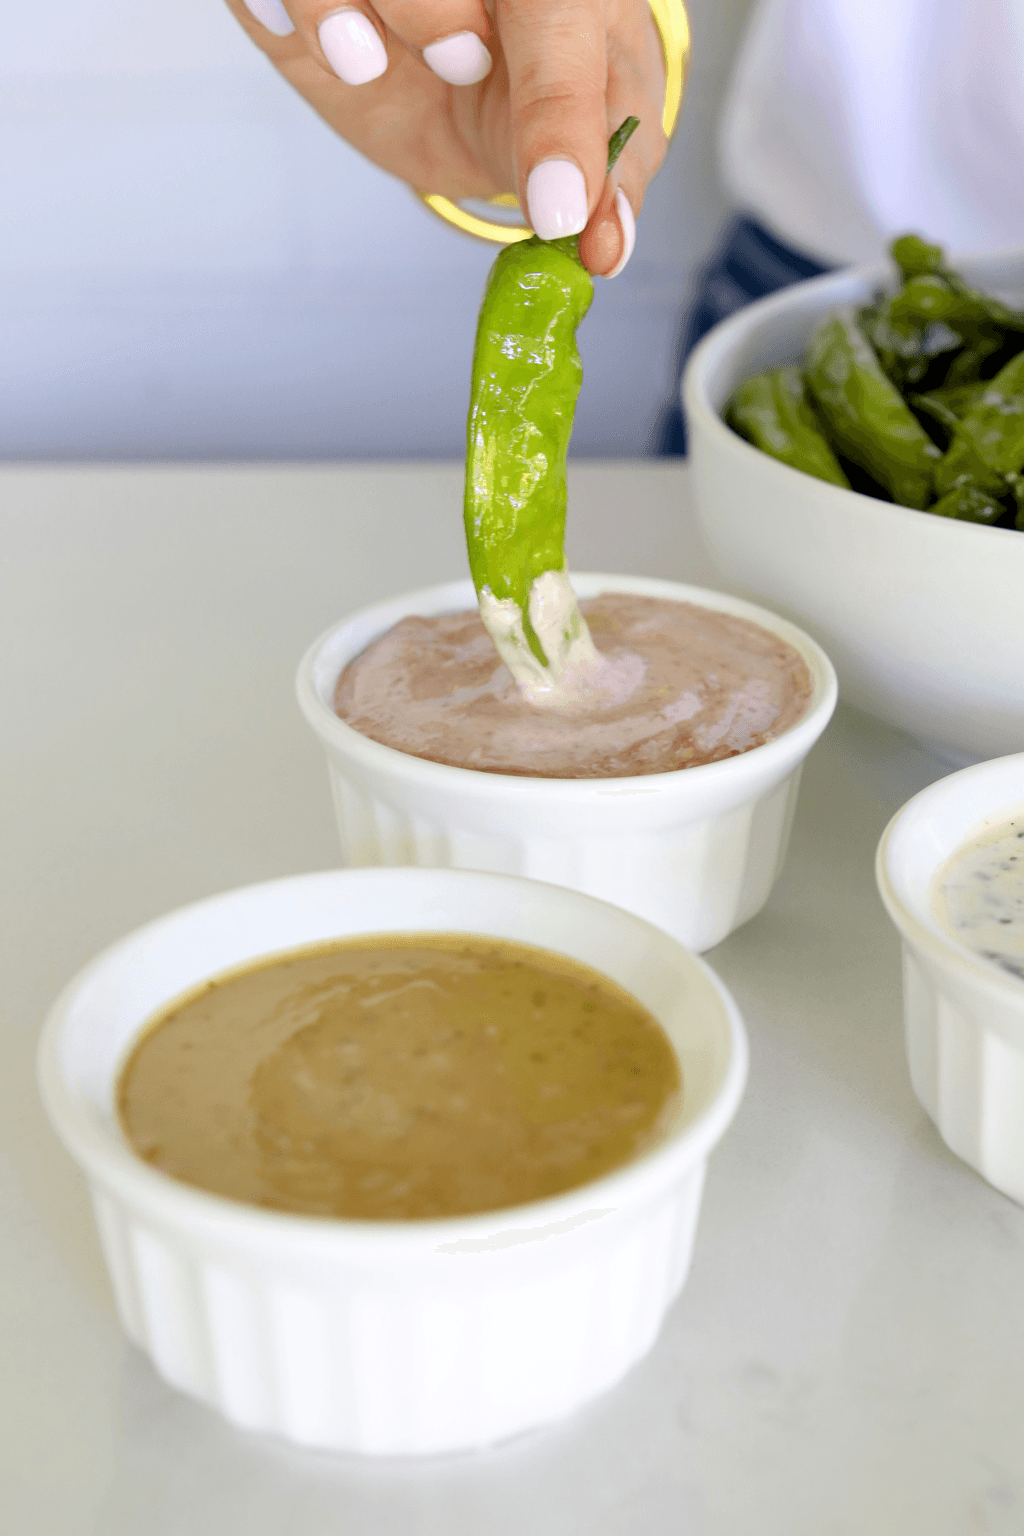 Whole30 Shishito Peppers and Dipping sauces 